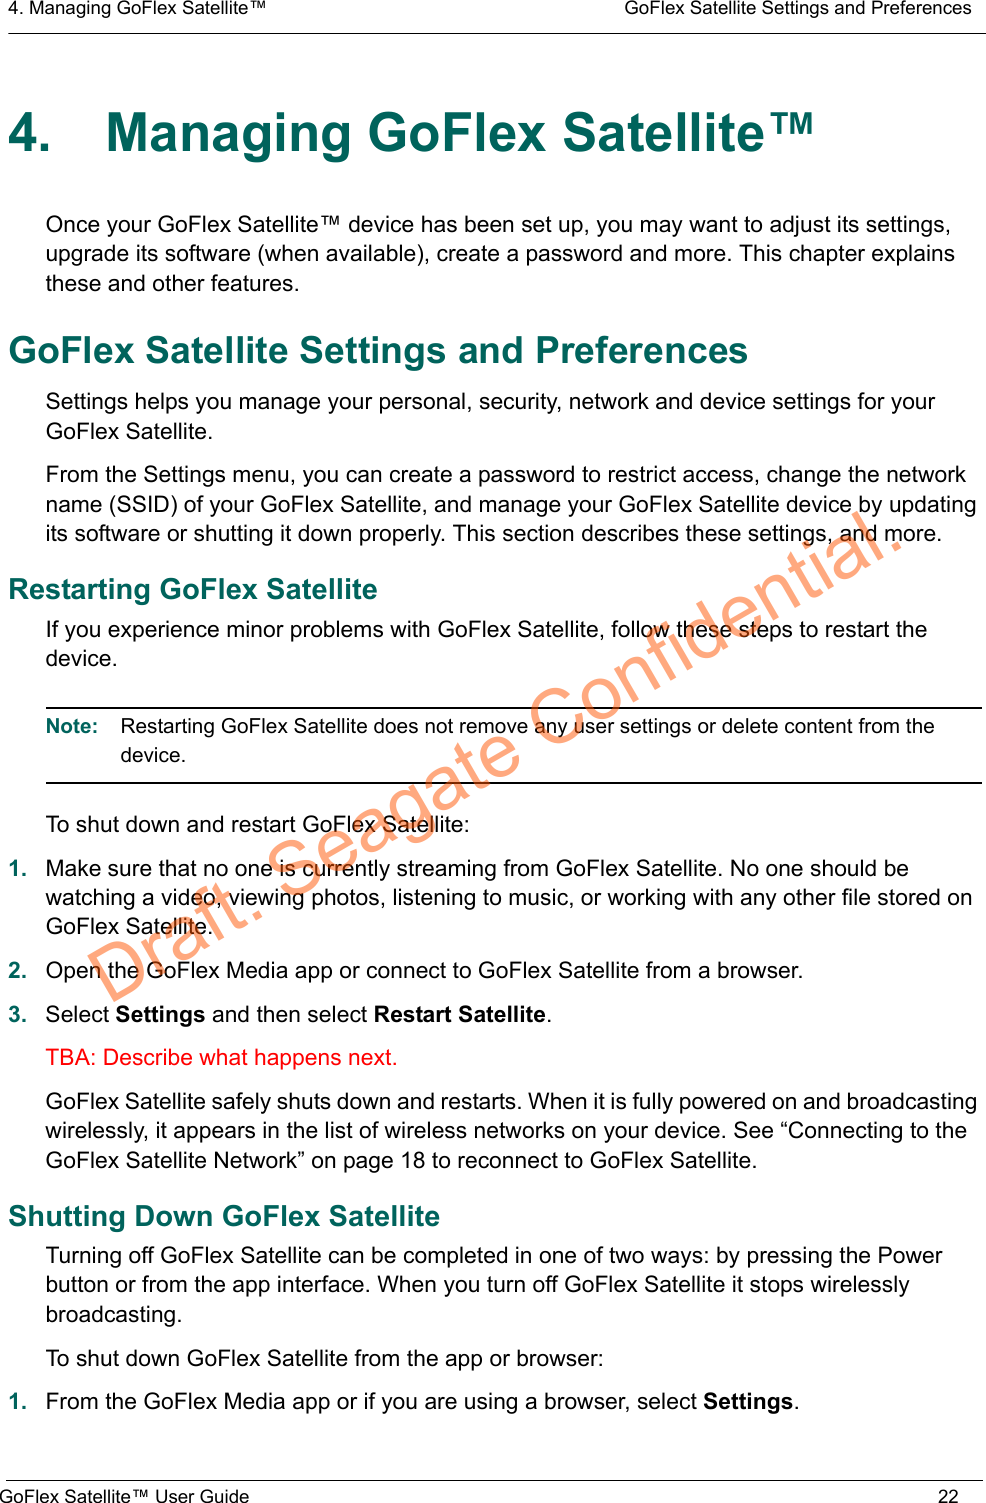 4. Managing GoFlex Satellite™  GoFlex Satellite Settings and PreferencesGoFlex Satellite™ User Guide 224. Managing GoFlex Satellite™Once your GoFlex Satellite™ device has been set up, you may want to adjust its settings, upgrade its software (when available), create a password and more. This chapter explains these and other features.GoFlex Satellite Settings and PreferencesSettings helps you manage your personal, security, network and device settings for your GoFlex Satellite.From the Settings menu, you can create a password to restrict access, change the network name (SSID) of your GoFlex Satellite, and manage your GoFlex Satellite device by updating its software or shutting it down properly. This section describes these settings, and more.Restarting GoFlex SatelliteIf you experience minor problems with GoFlex Satellite, follow these steps to restart the device.Note:  Restarting GoFlex Satellite does not remove any user settings or delete content from the device.To shut down and restart GoFlex Satellite:1. Make sure that no one is currently streaming from GoFlex Satellite. No one should be watching a video, viewing photos, listening to music, or working with any other file stored on GoFlex Satellite.2. Open the GoFlex Media app or connect to GoFlex Satellite from a browser.3. Select Settings and then select Restart Satellite.TBA: Describe what happens next.GoFlex Satellite safely shuts down and restarts. When it is fully powered on and broadcasting wirelessly, it appears in the list of wireless networks on your device. See “Connecting to the GoFlex Satellite Network” on page 18 to reconnect to GoFlex Satellite.Shutting Down GoFlex SatelliteTurning off GoFlex Satellite can be completed in one of two ways: by pressing the Power button or from the app interface. When you turn off GoFlex Satellite it stops wirelessly broadcasting.To shut down GoFlex Satellite from the app or browser:1. From the GoFlex Media app or if you are using a browser, select Settings.Draft. Seagate Confidential.